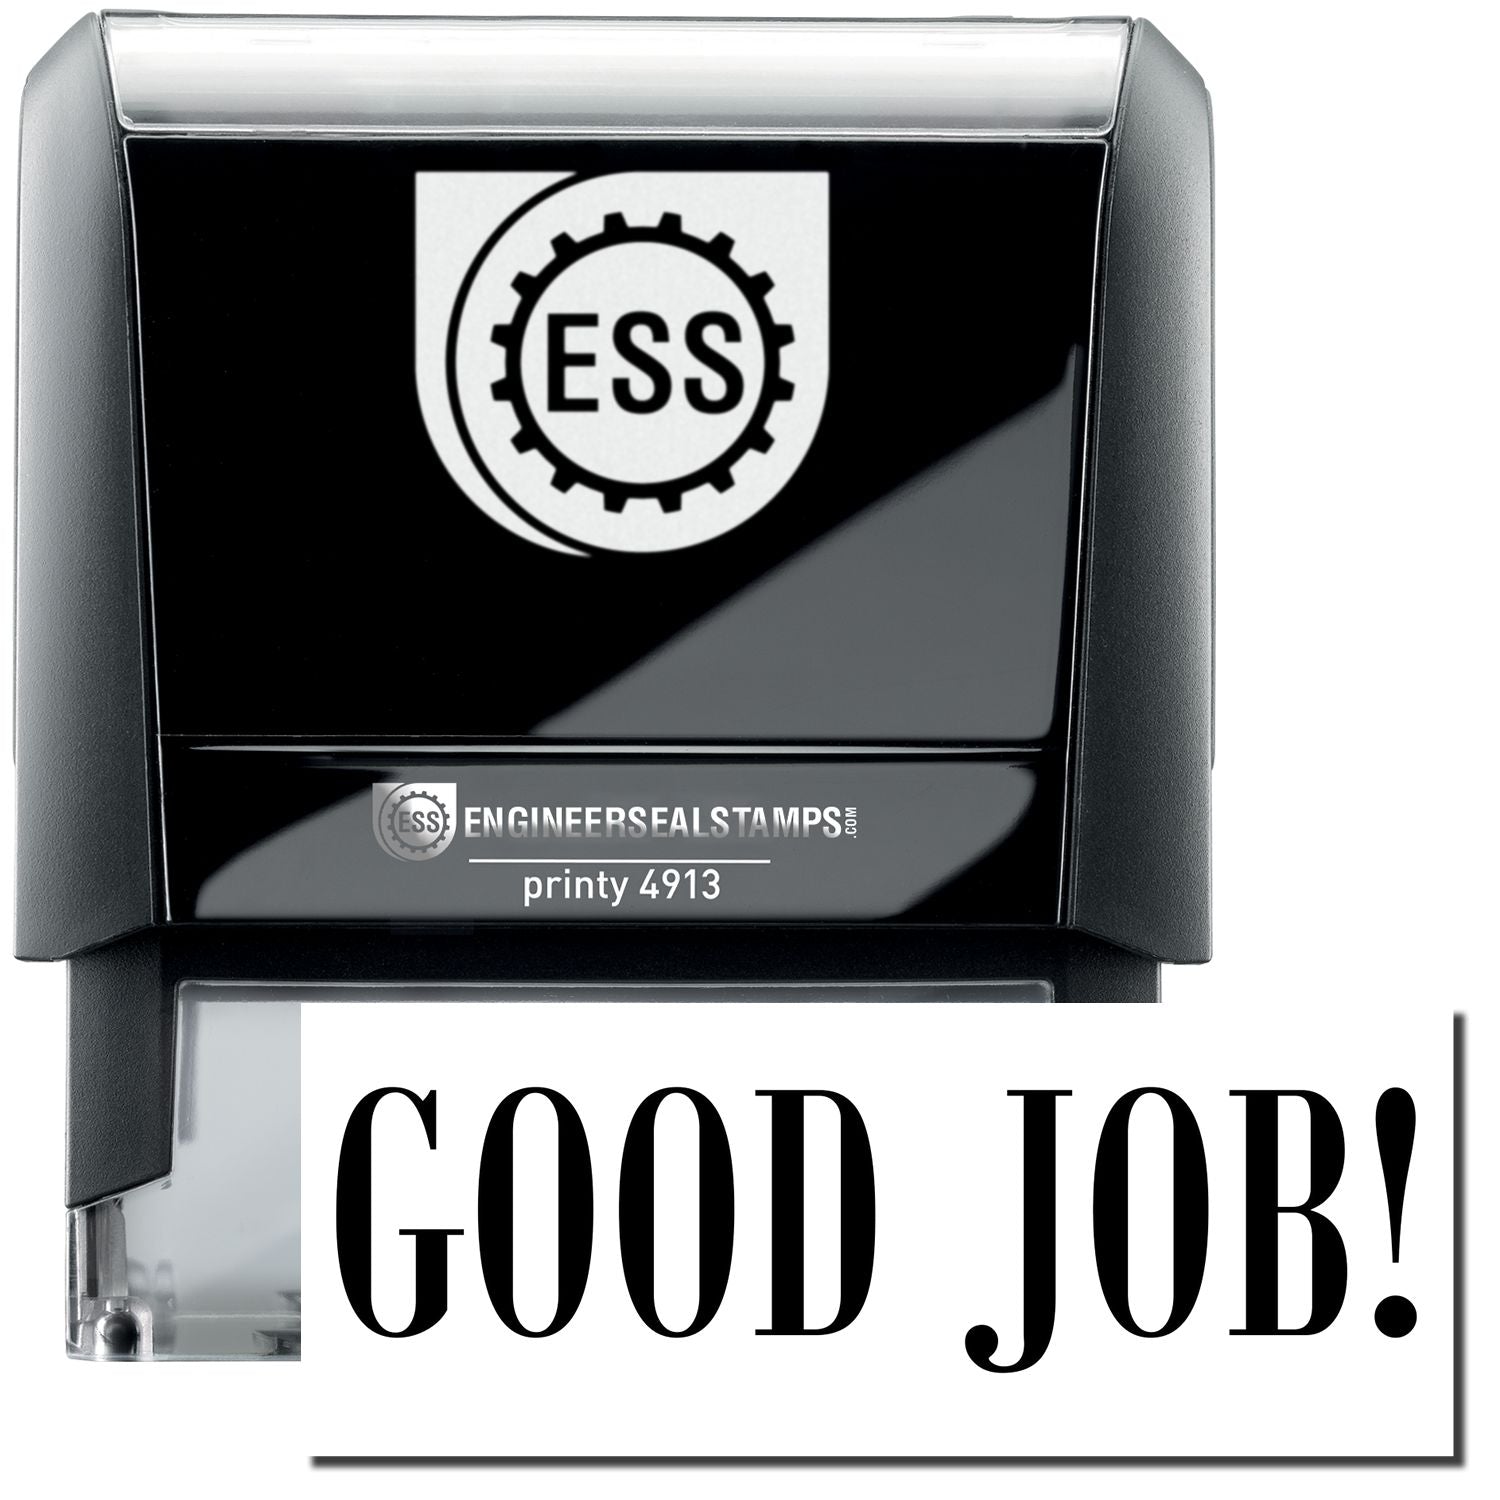 A self-inking stamp with a stamped image showing how the text "GOOD JOB!" in a large bold font is displayed by it.